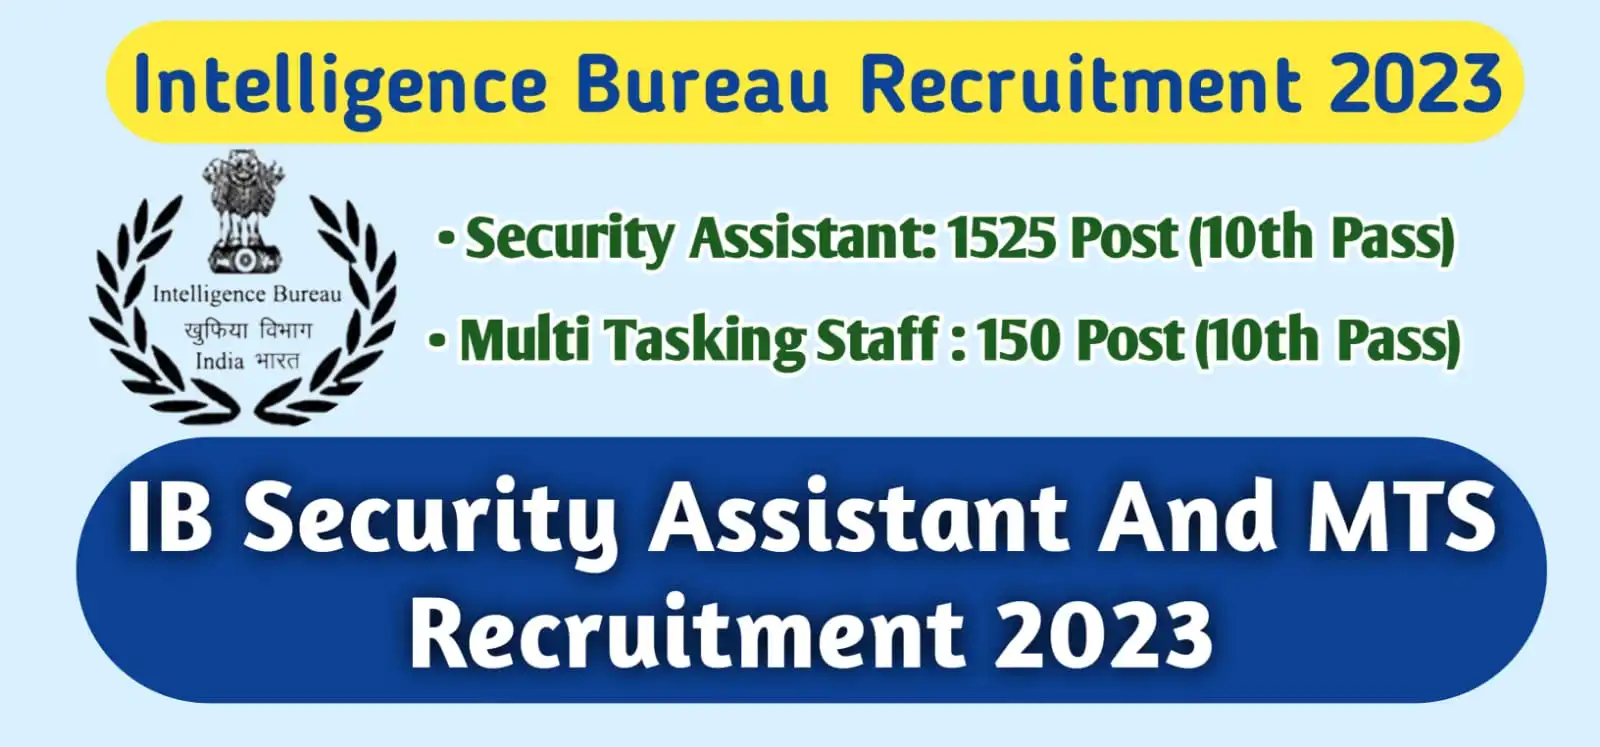 IB Security Assistant And MTS Recruitment 2023